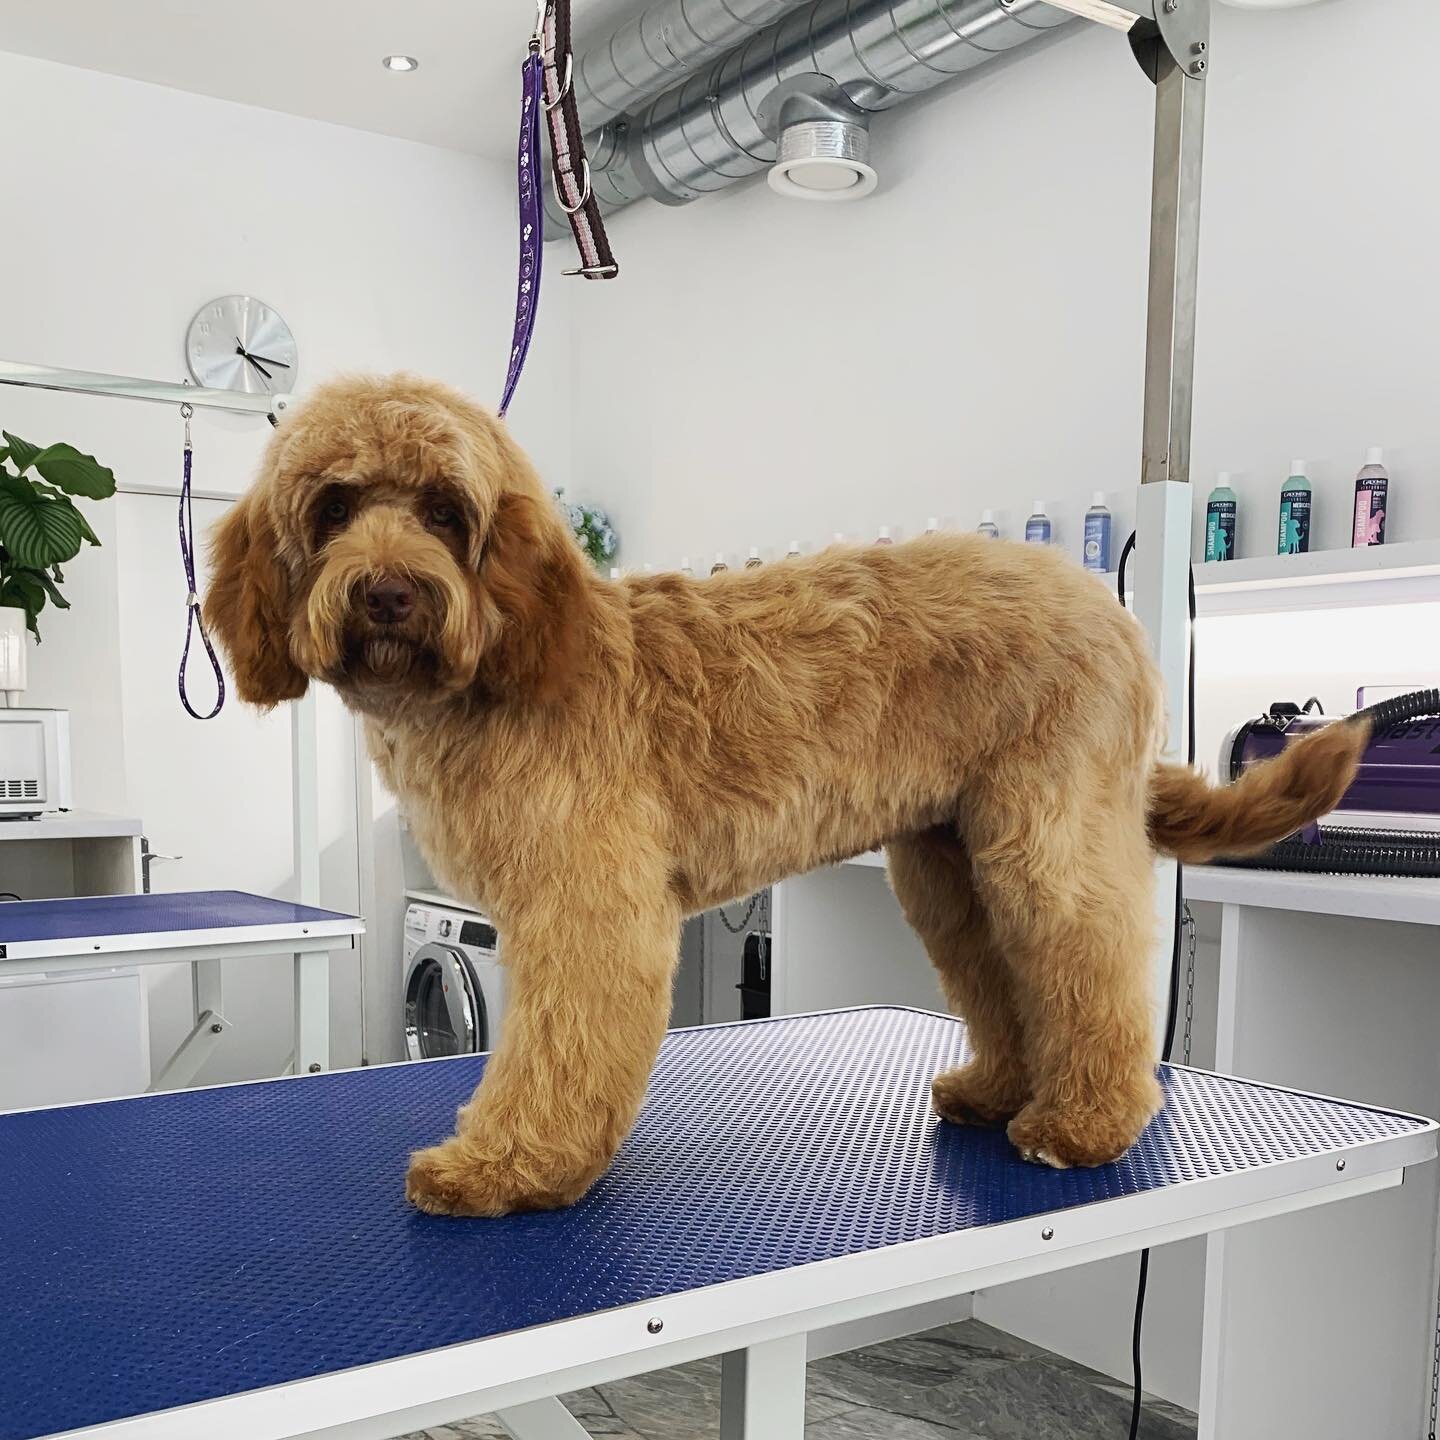 Esme the Australian Miniature Labradoodle 😍 Esme&rsquo;s owner didn&rsquo;t want too much off her, keeping her fairly long and natural, but with more shape 🐶 Swipe to see her before! ➡️ 
.
.
.
.
.
#petspaessex #brentwood #essex #doggrooming #doggro